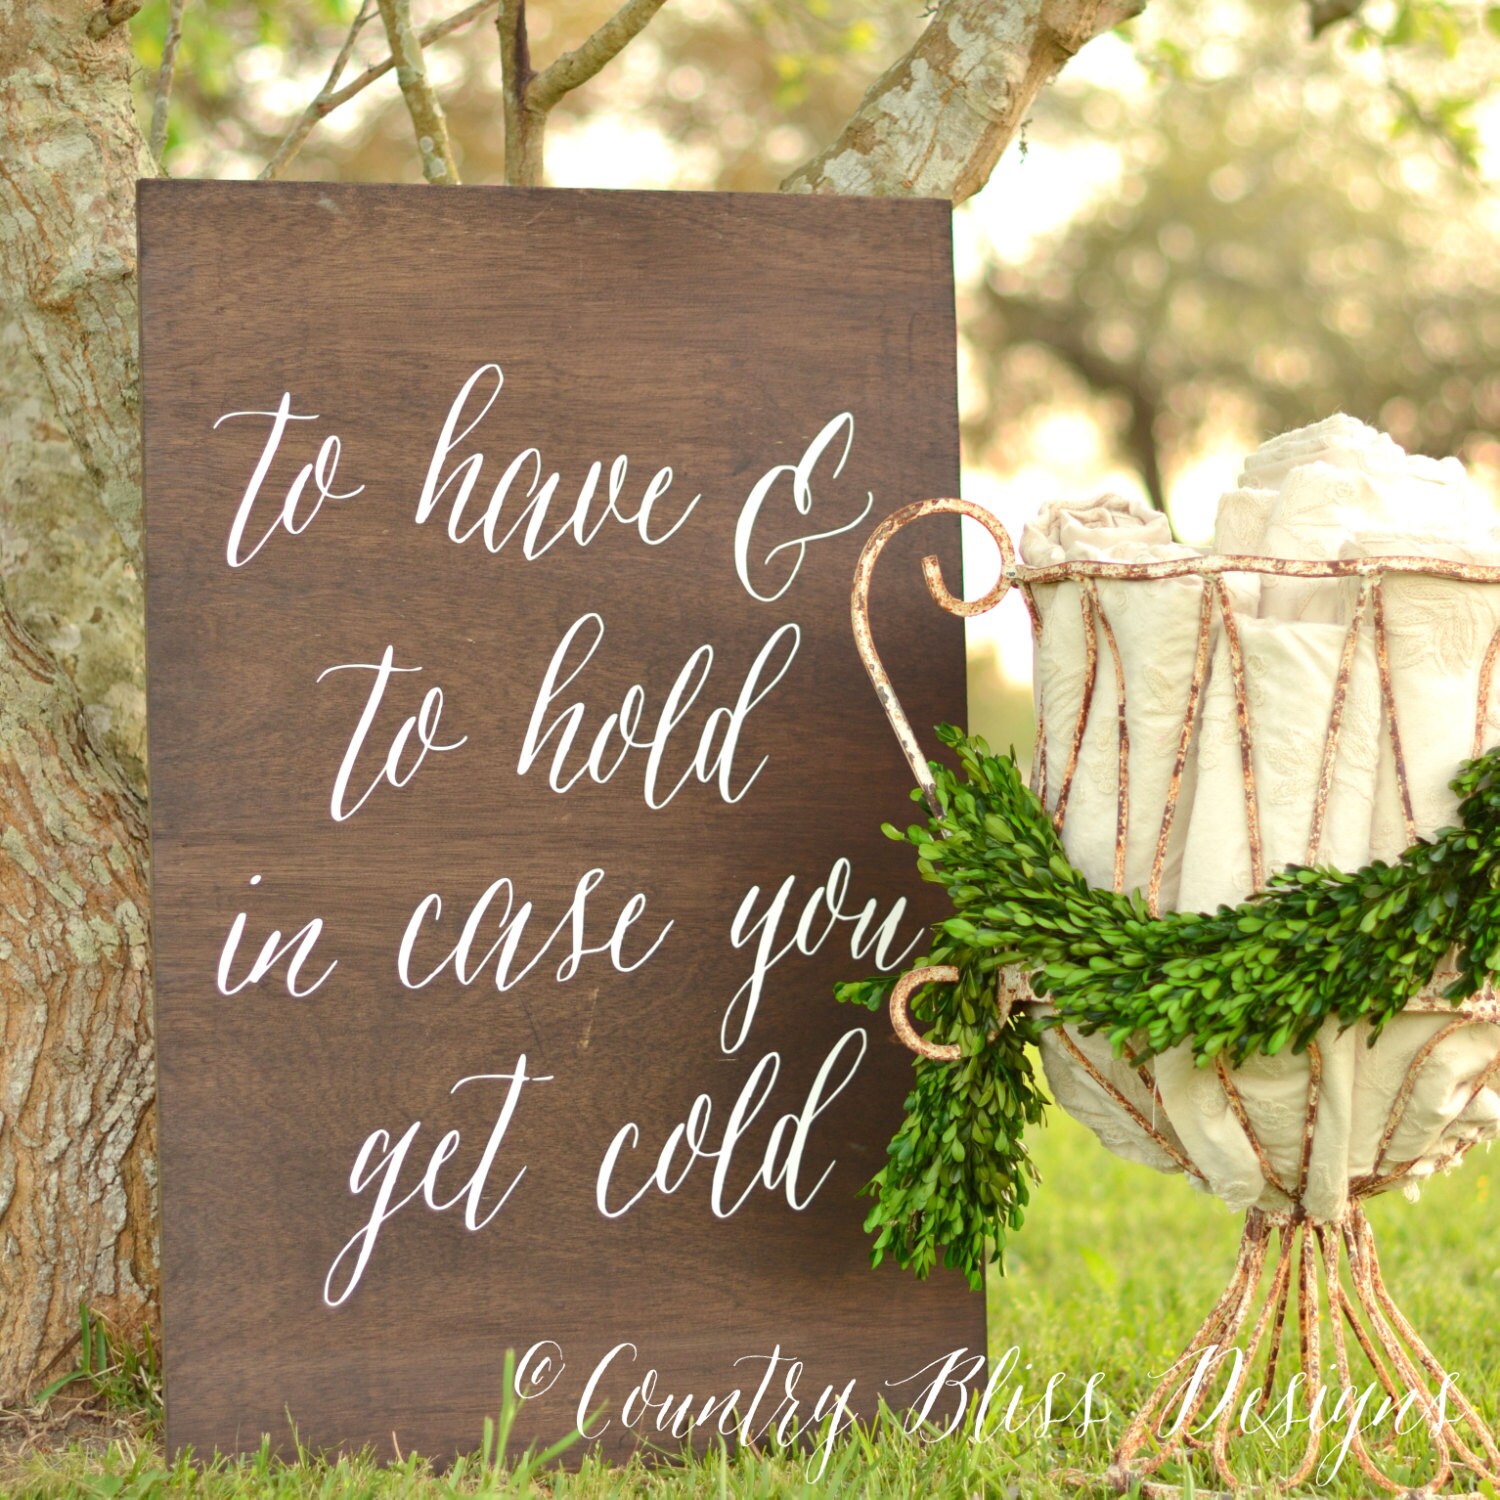 To Have And To Hold In Case You Get Cold Sign Blankets For Etsy